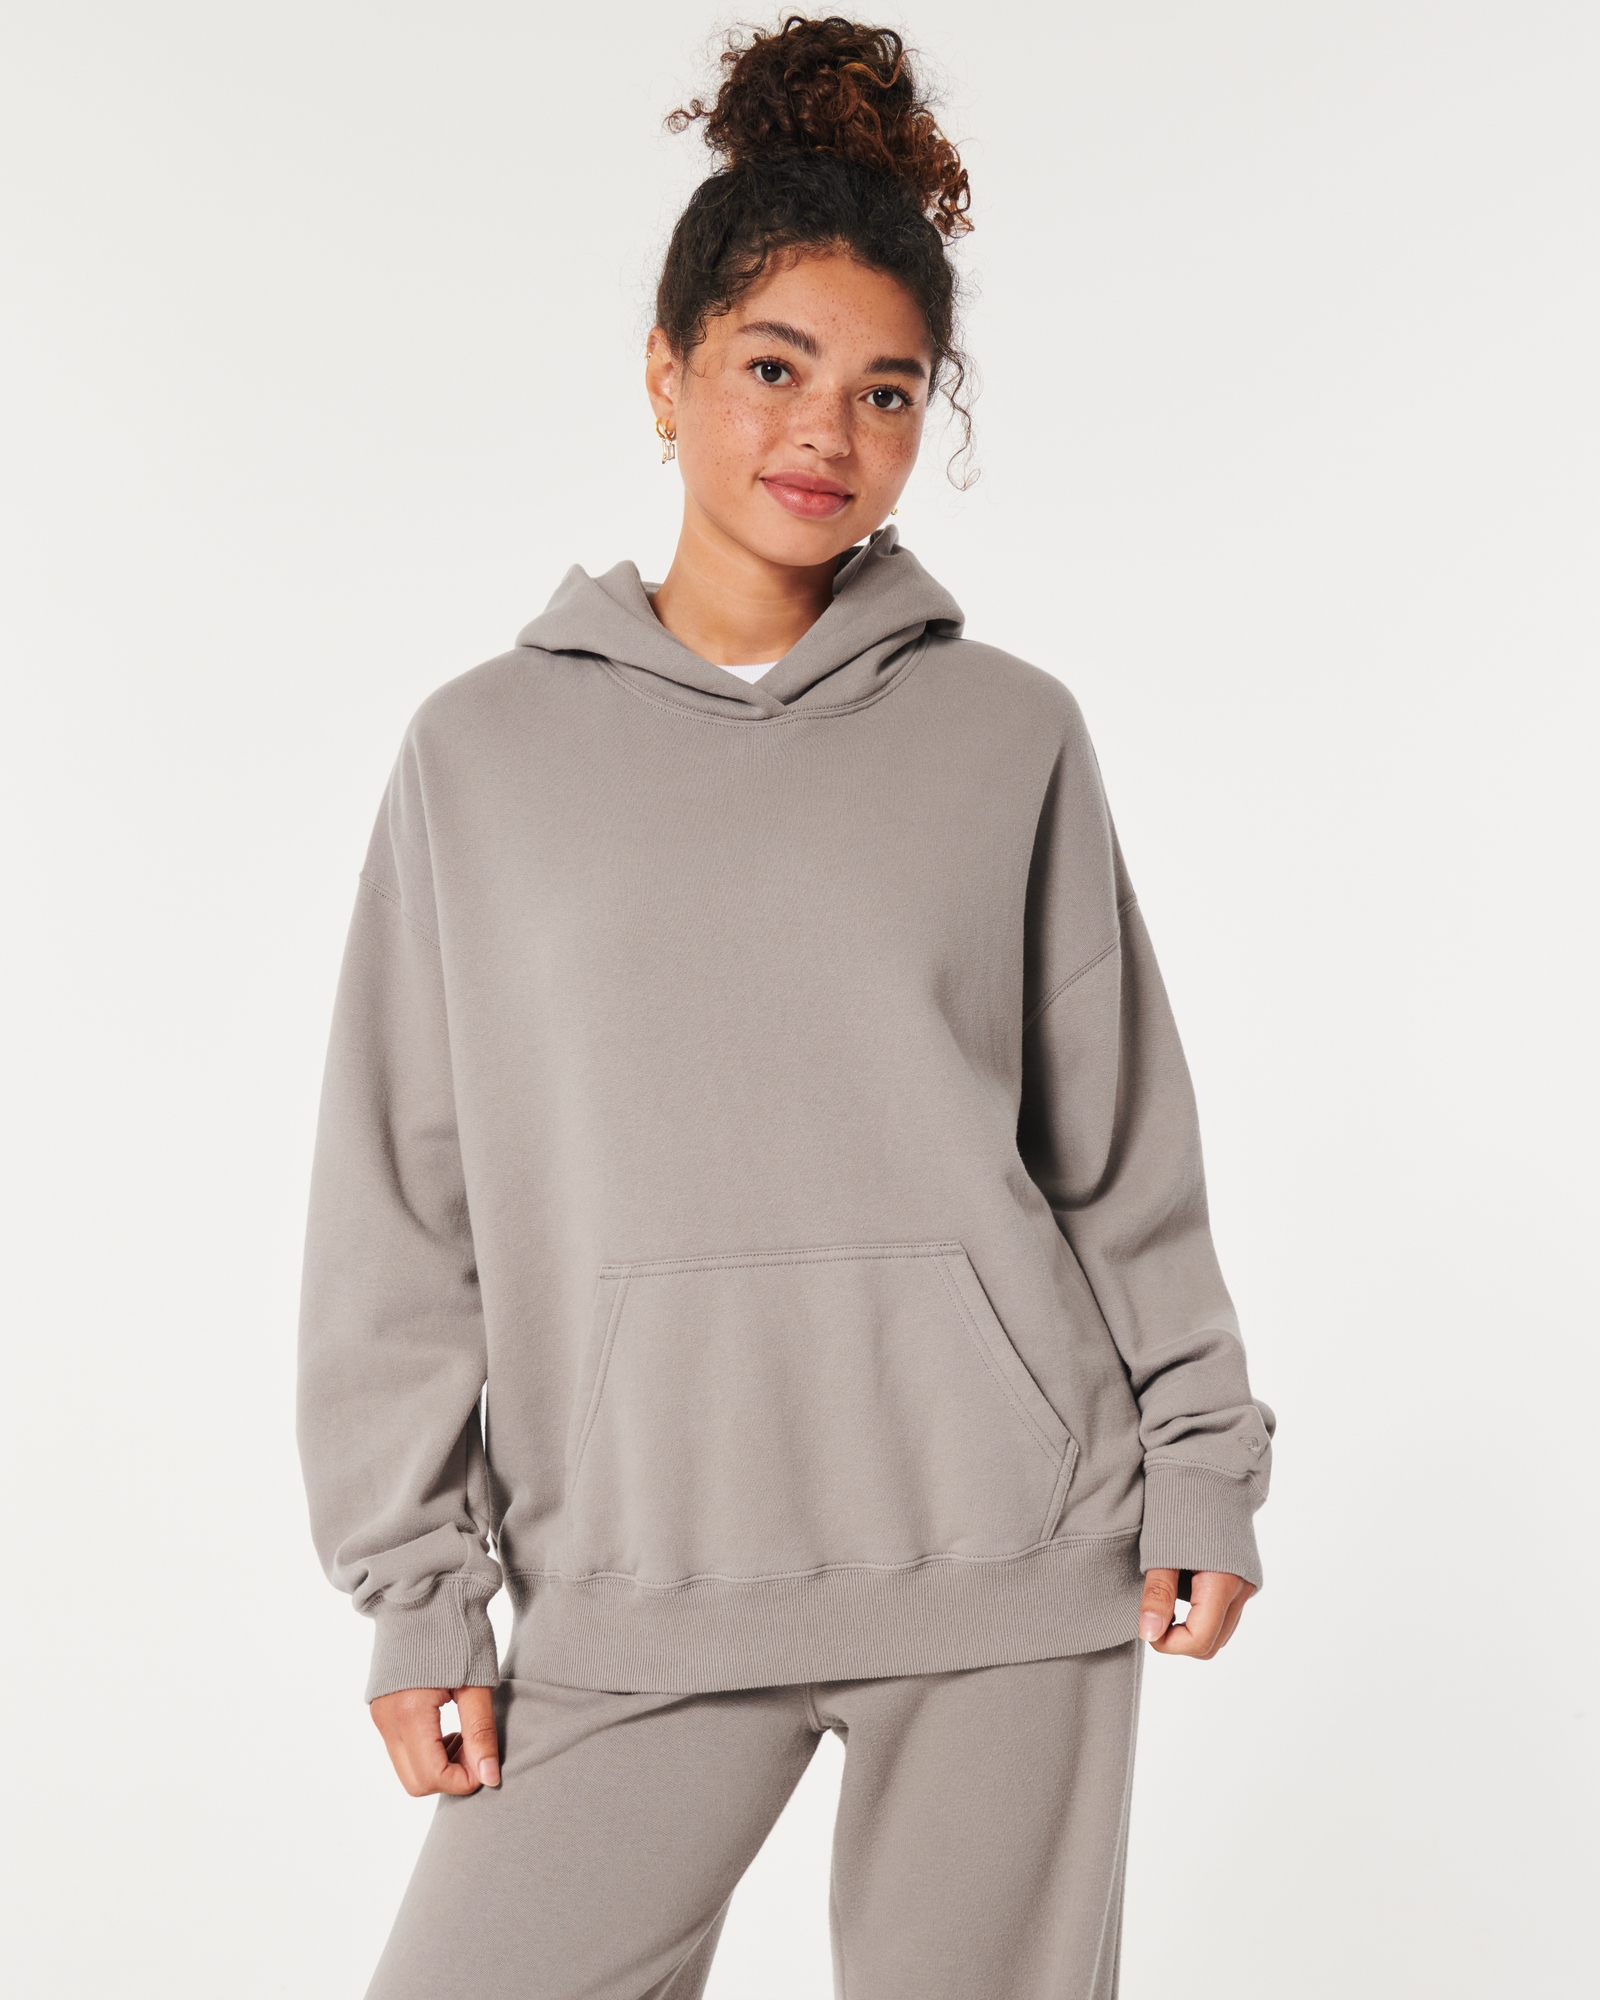 Shop Hollister Drawstring Hoodies for Women up to 55% Off